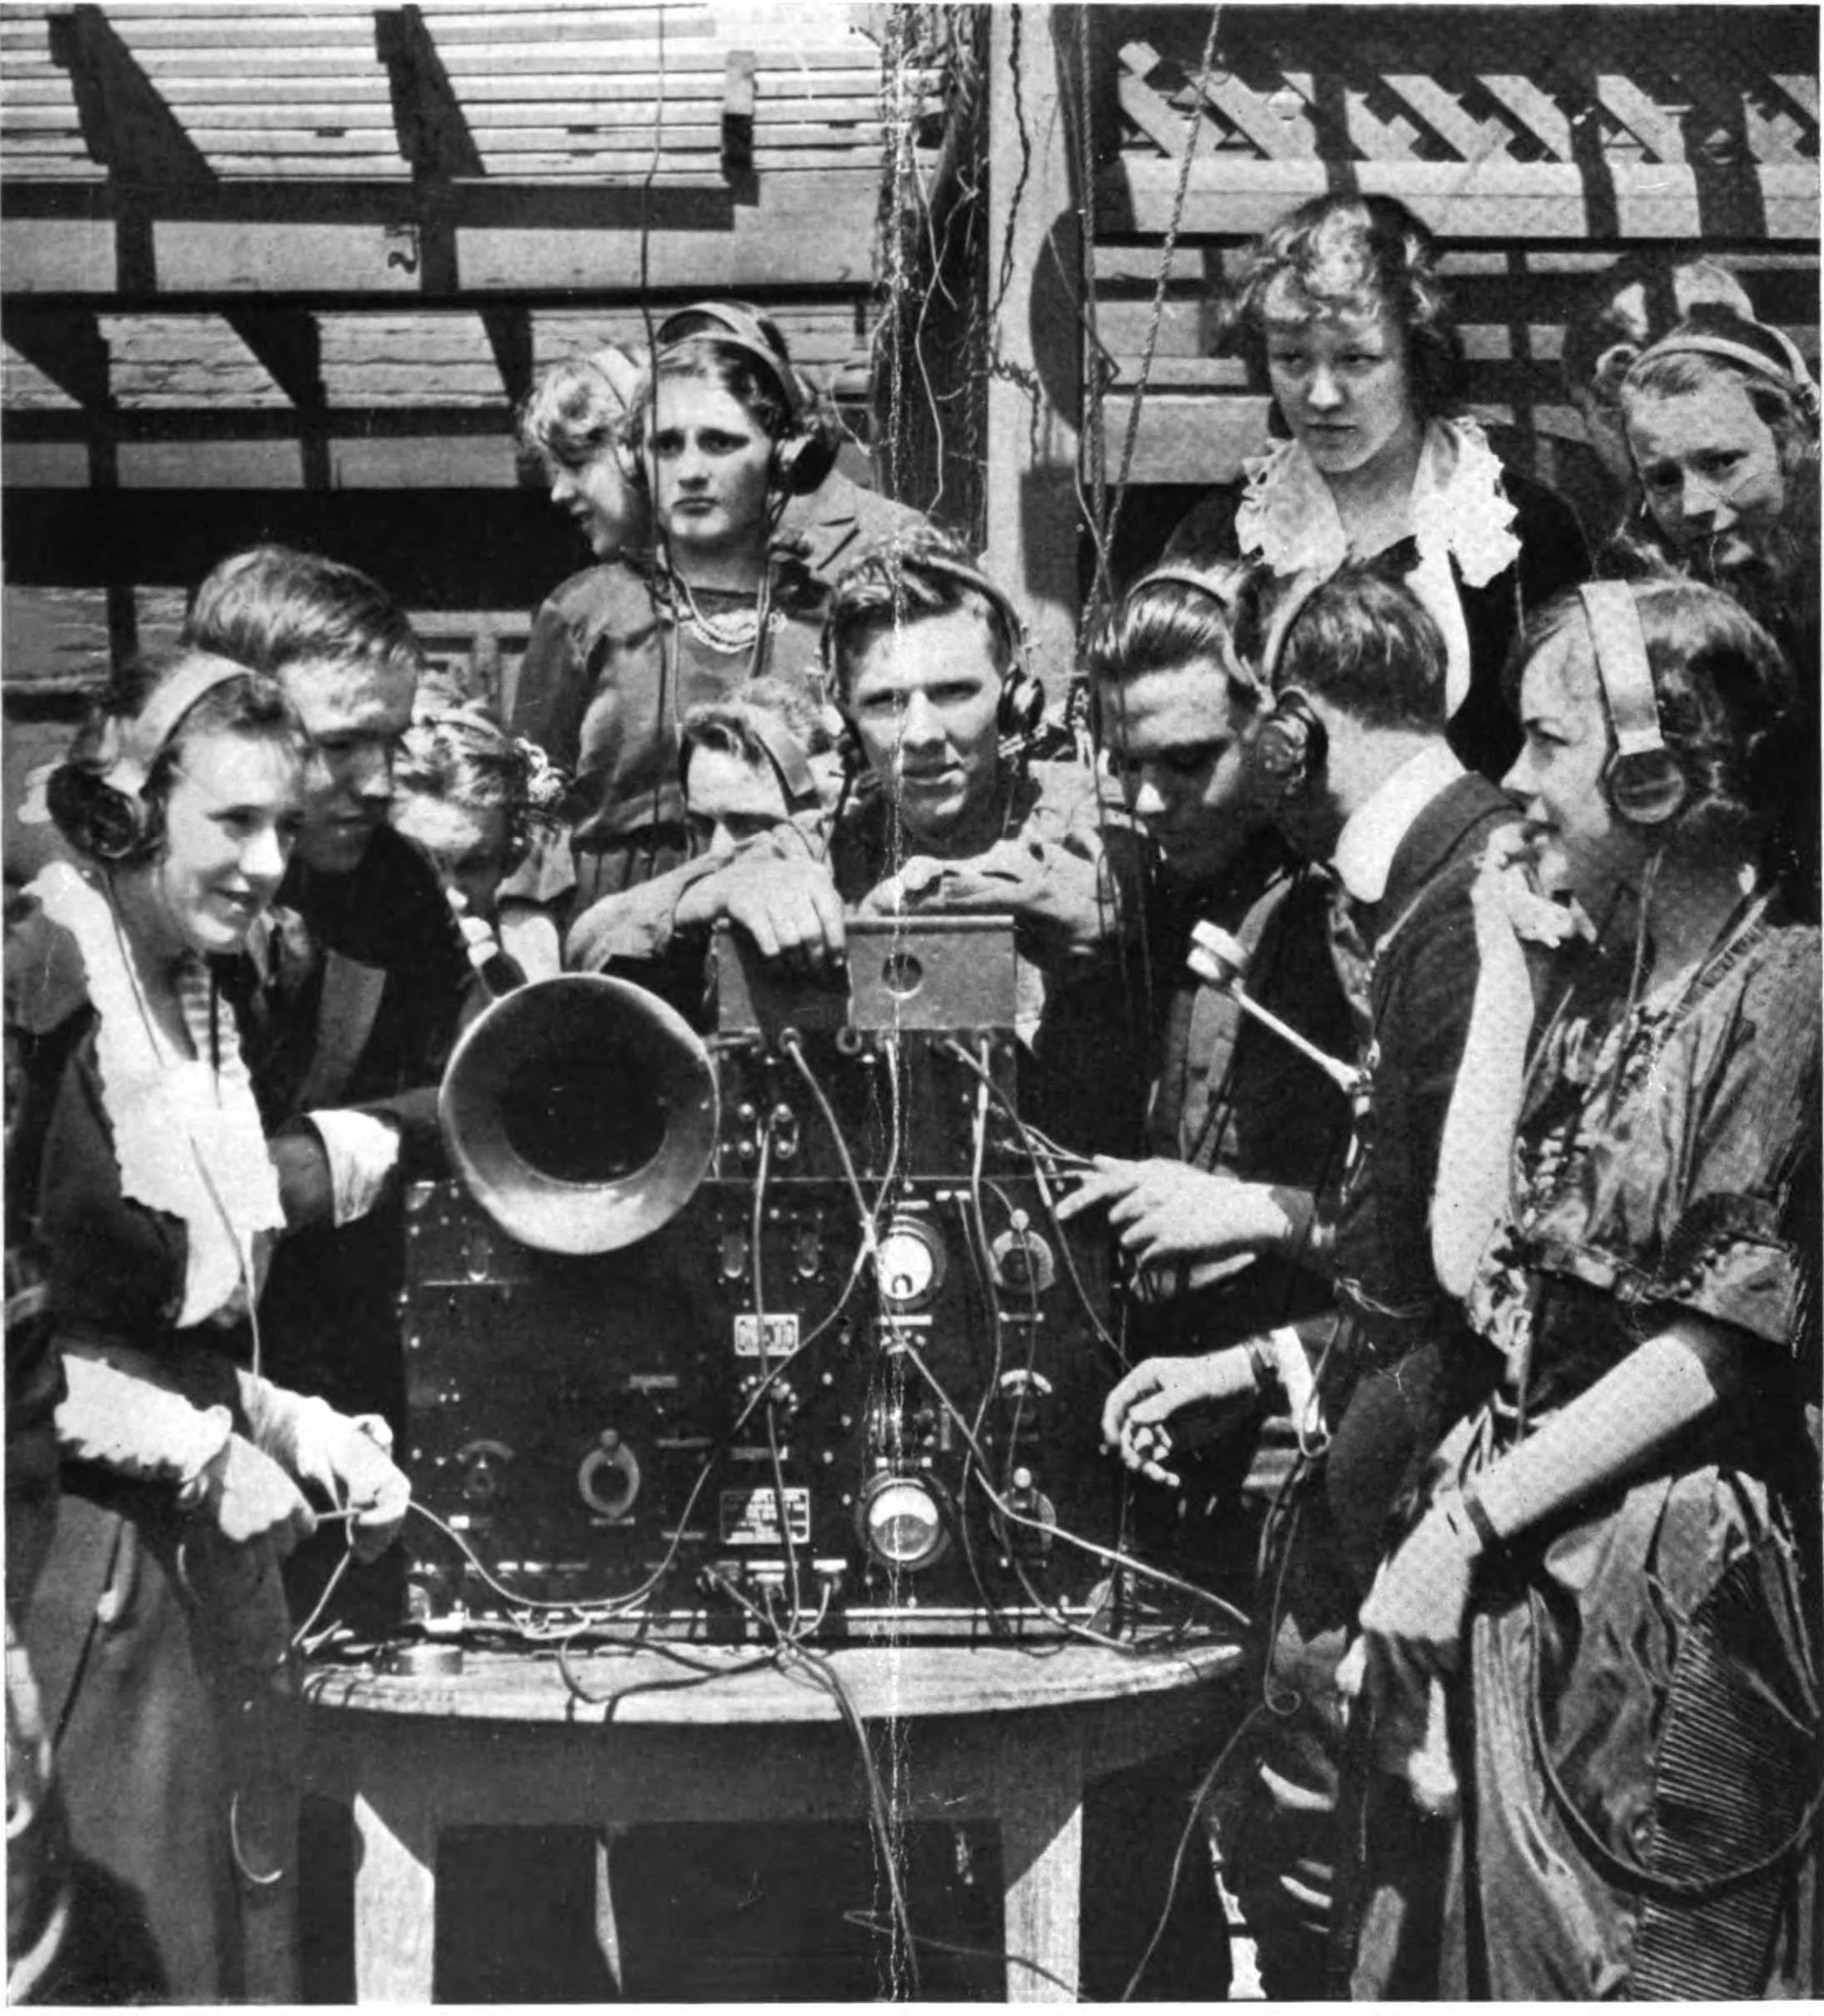 A "radiophone dance" held by an Atlanta social club in May 1920 in which the participants danced, while wearing headphones, to music transmitted from a band across town.